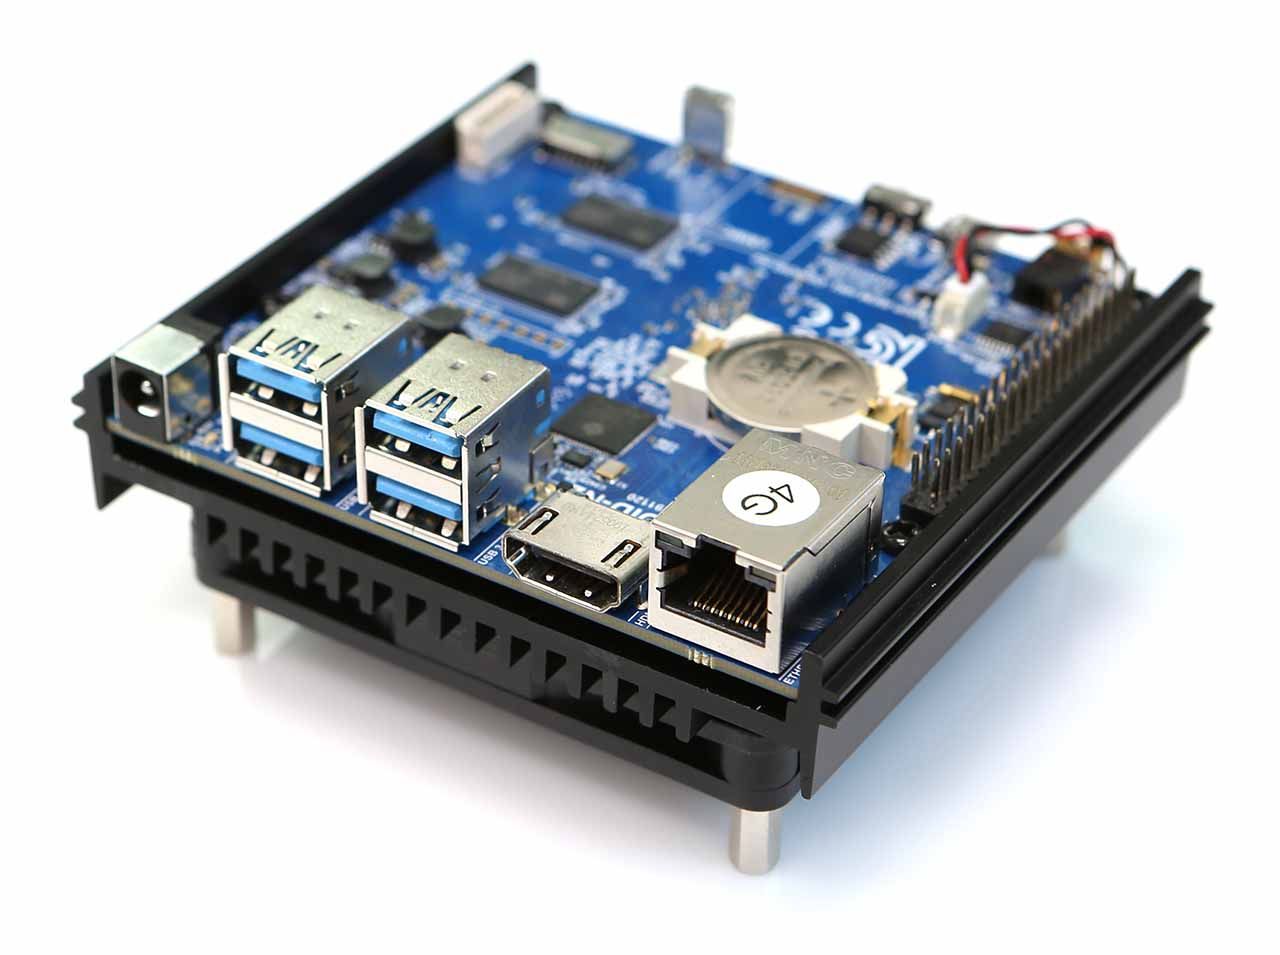 ODROID N2+ image showing ports